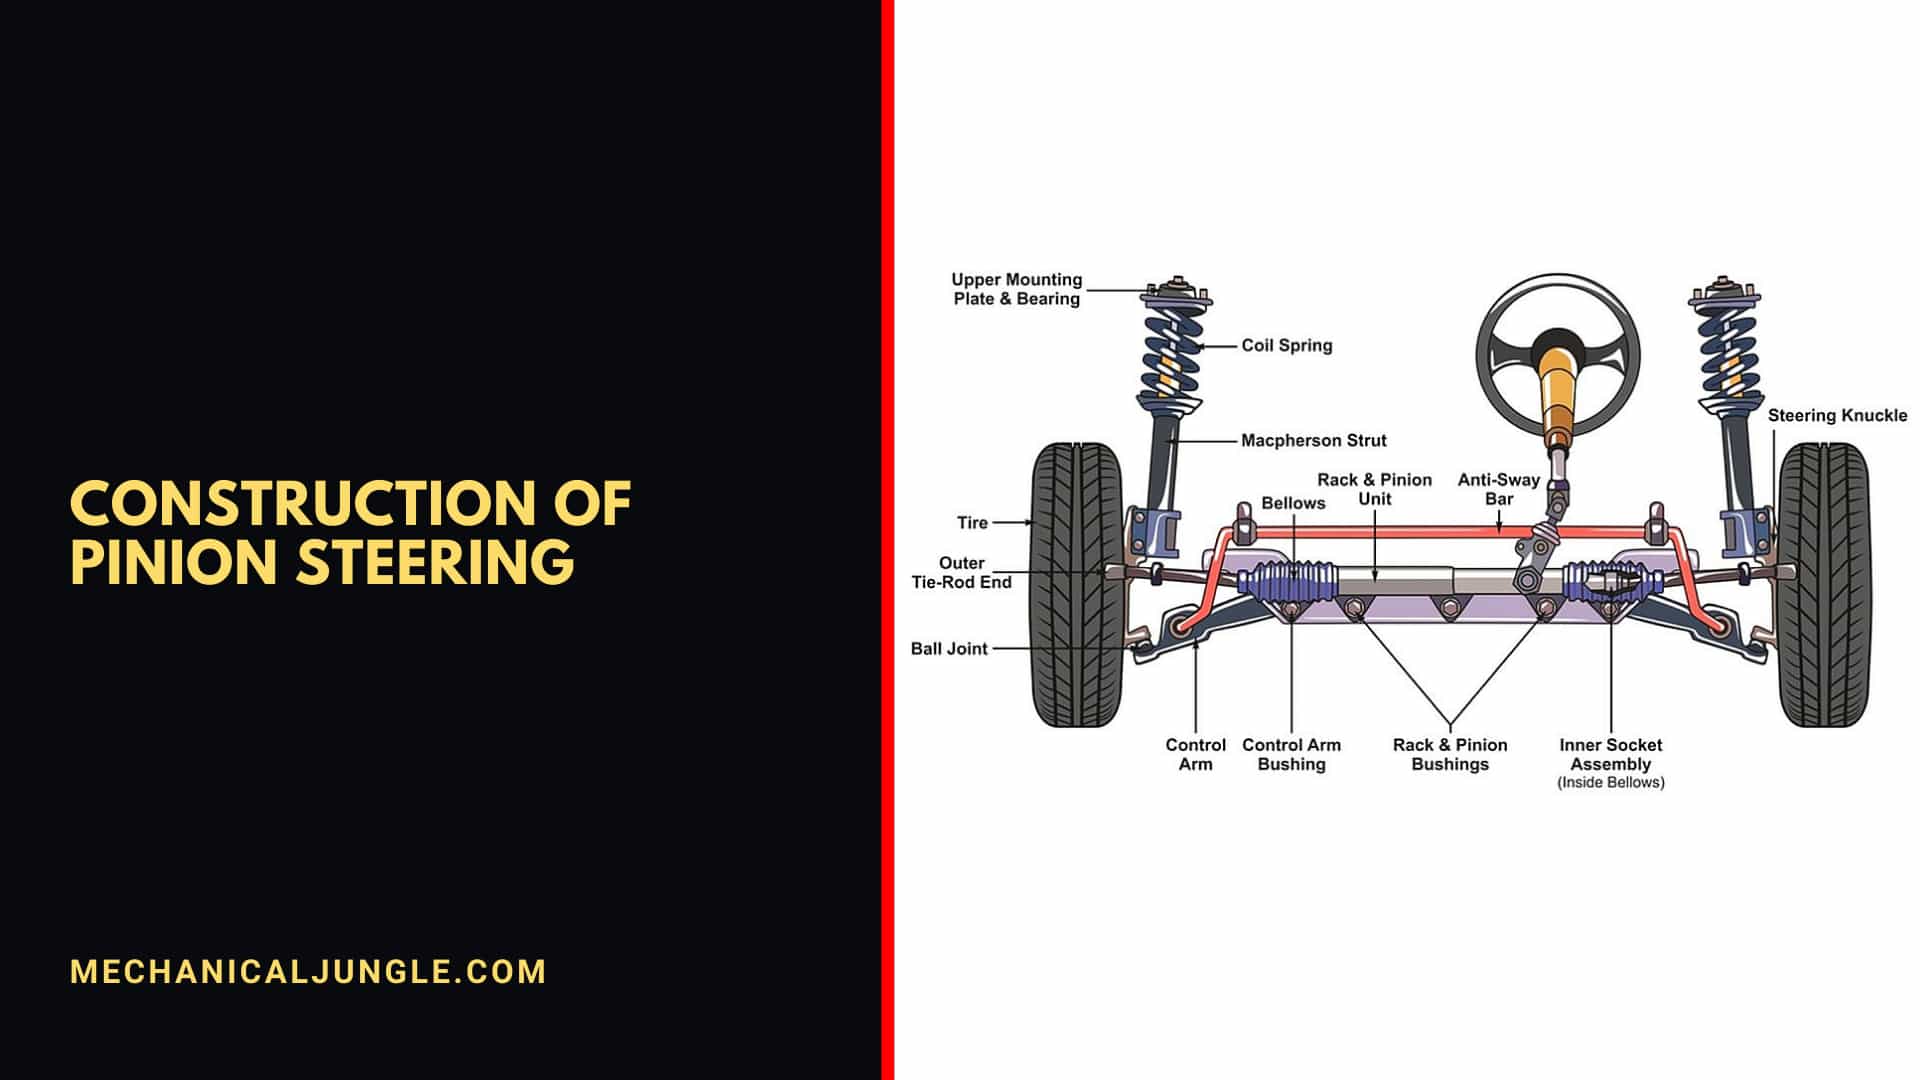 Construction of Pinion Steering